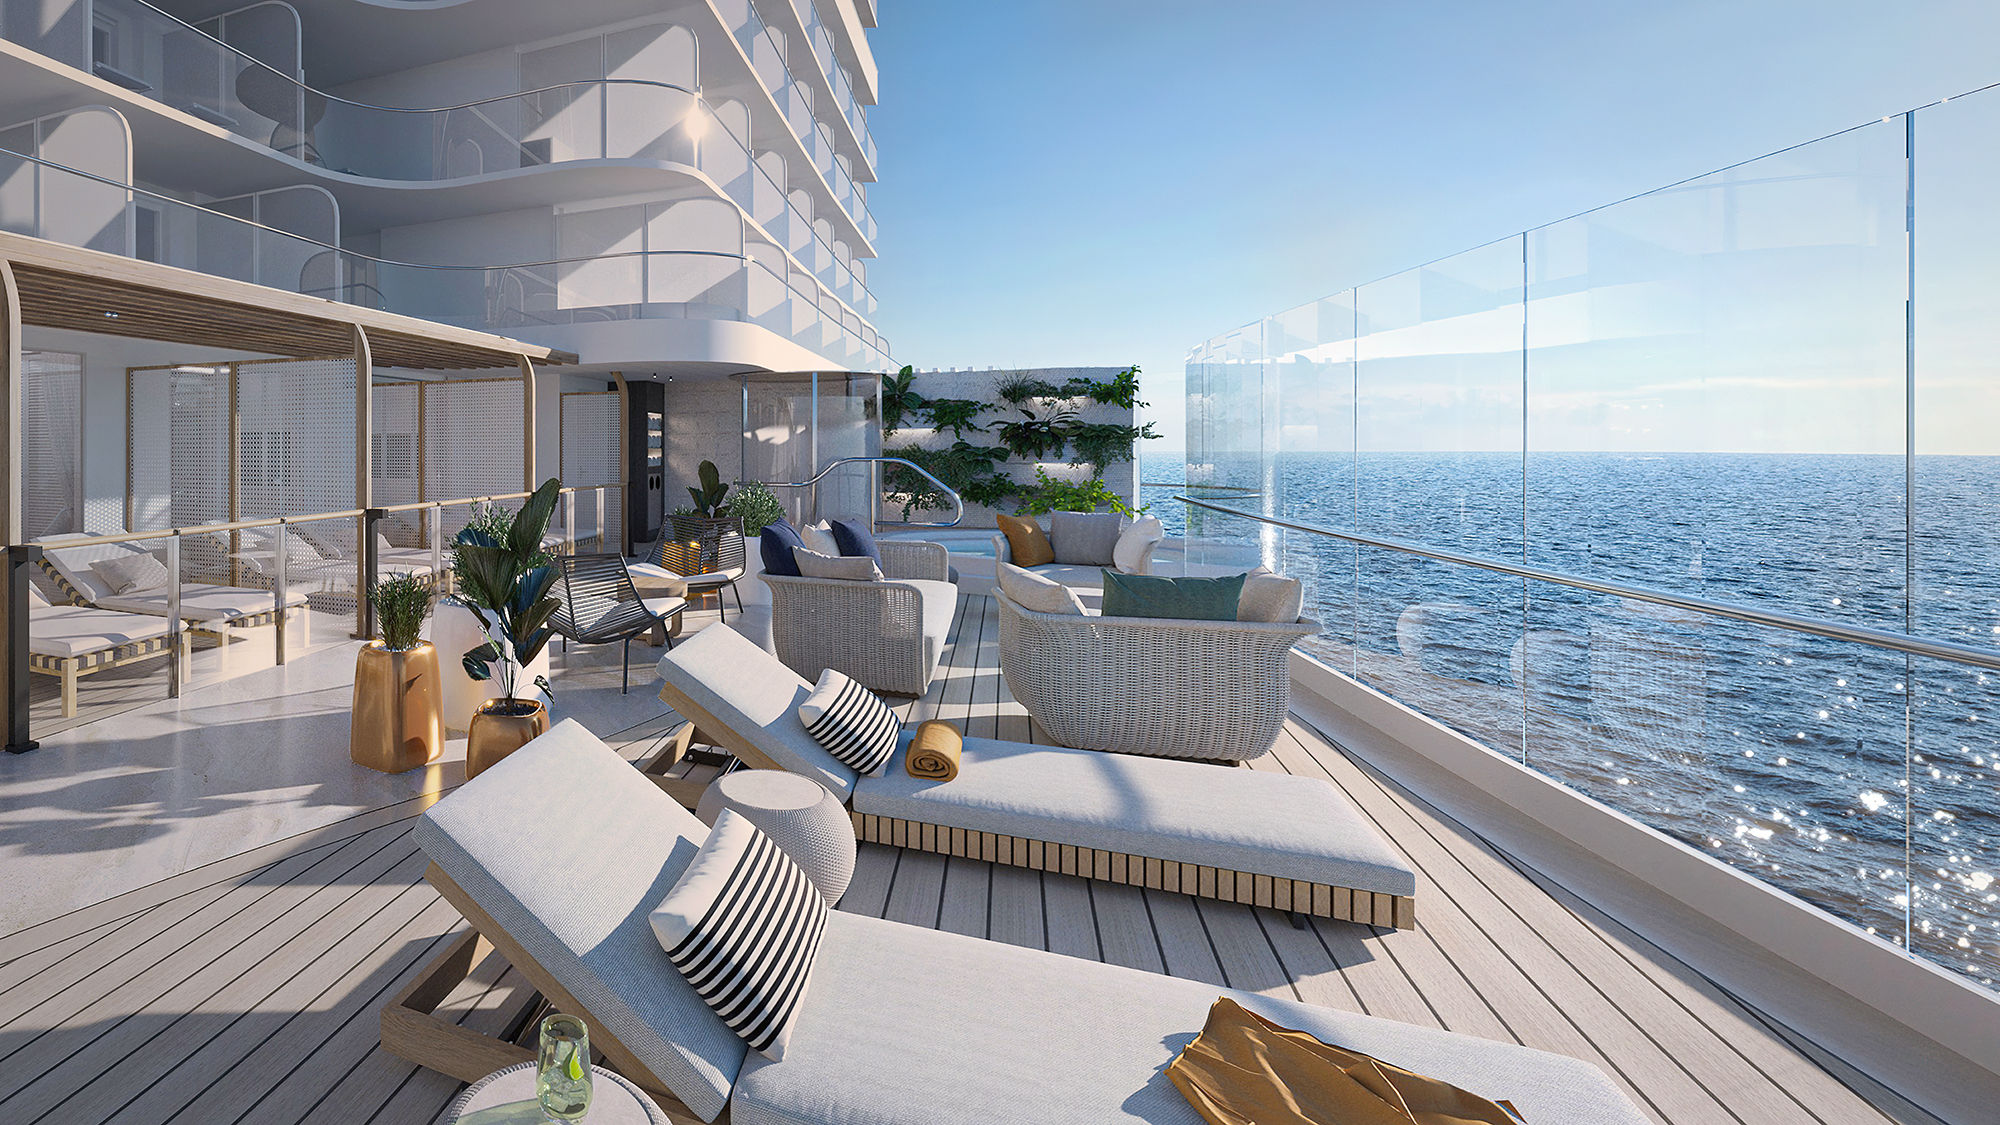 Cabana rooms will open onto the Cabana Deck with its own Jacuzzi.